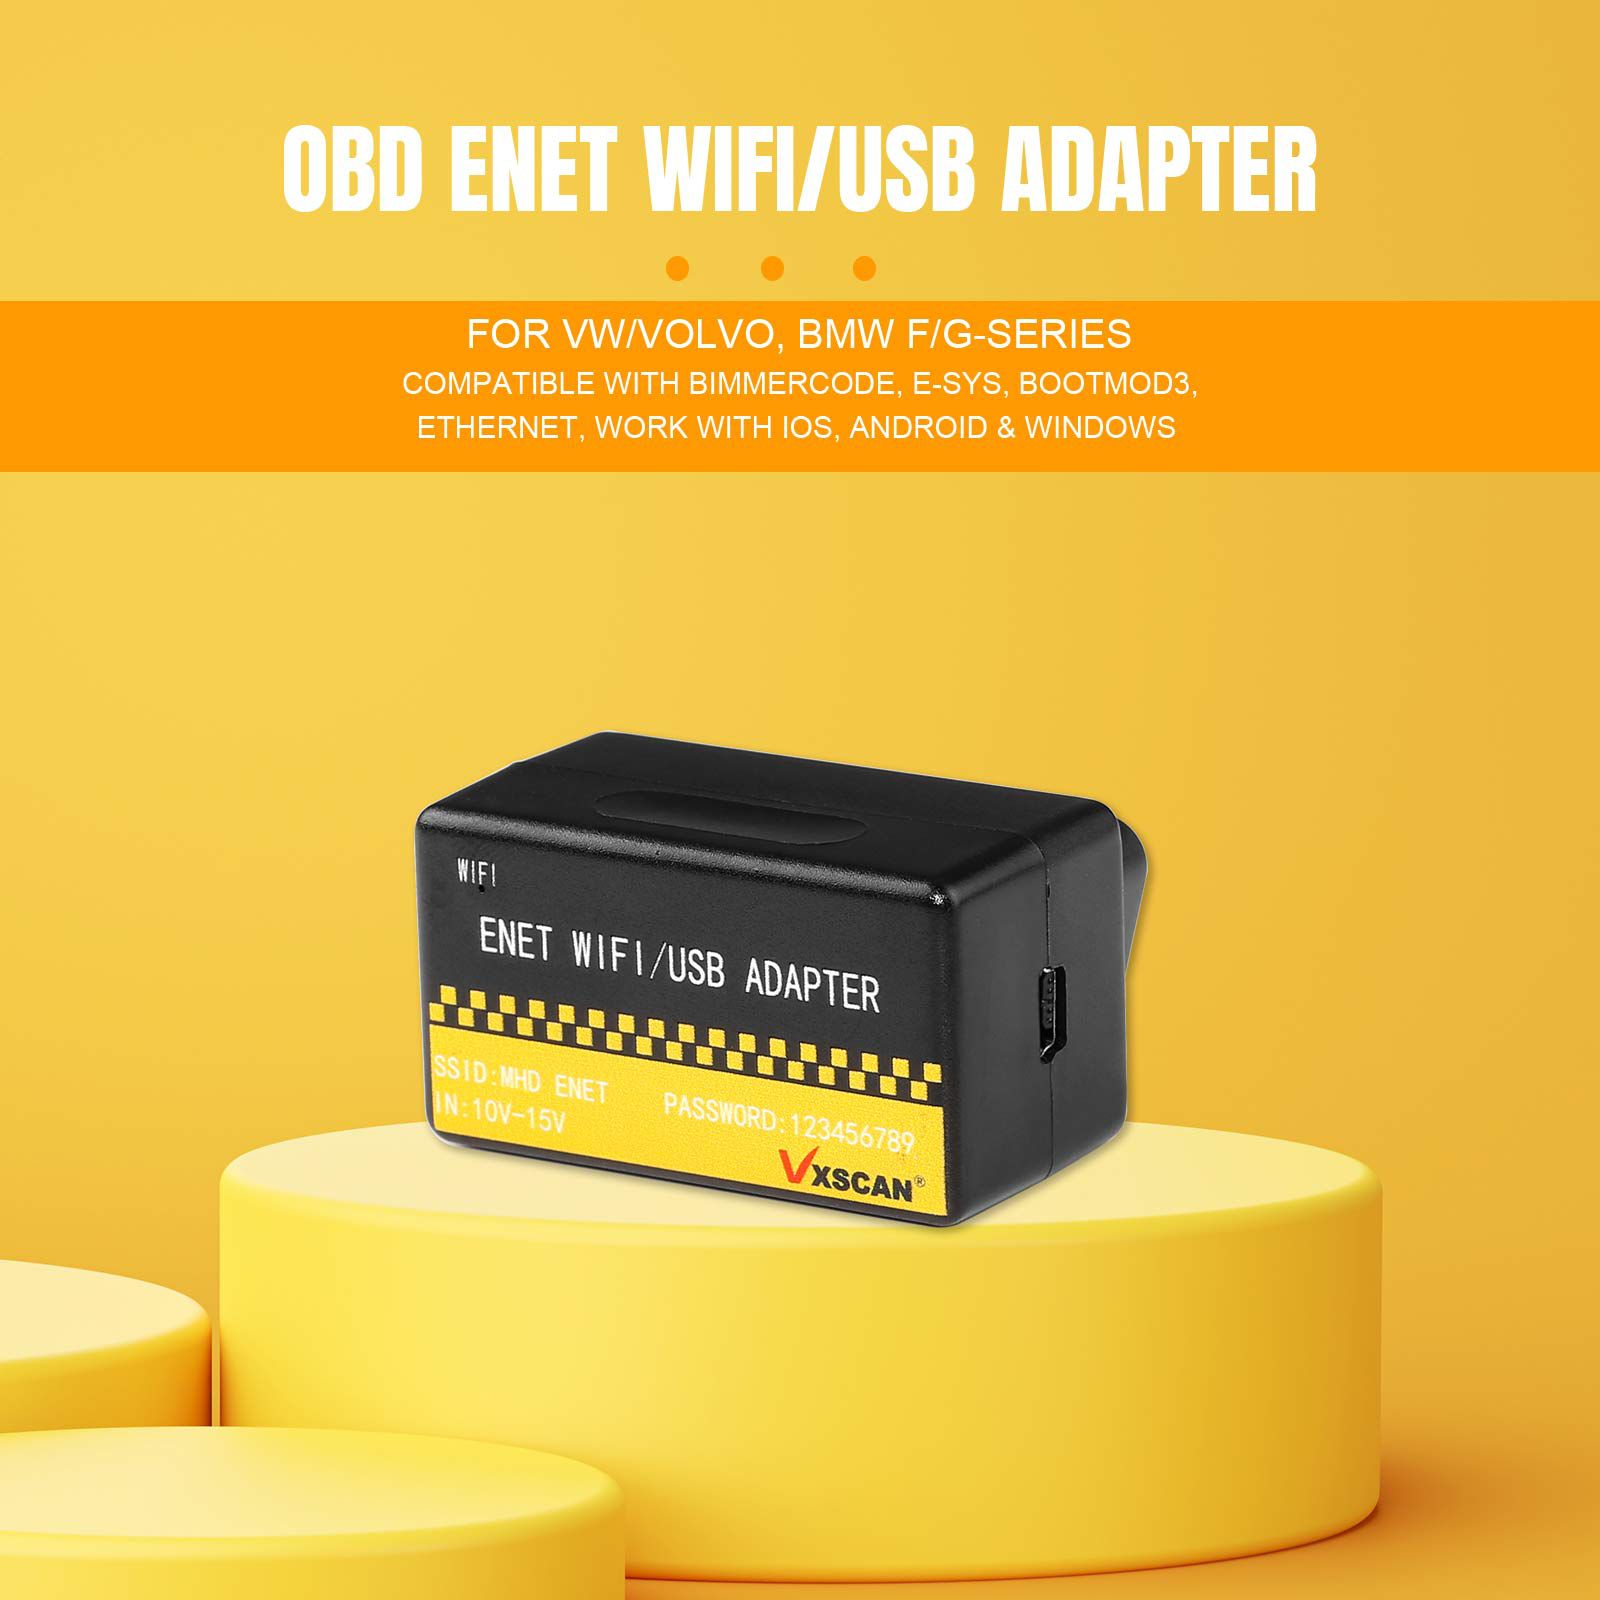 2022 OBD ENET WIFI/USB Adapter DOIP For VW/VOLVO BMW F/G-series Compatible with BimmerCode E-SYS Bootmod3 Ethernet Work with iOS Android & Windows